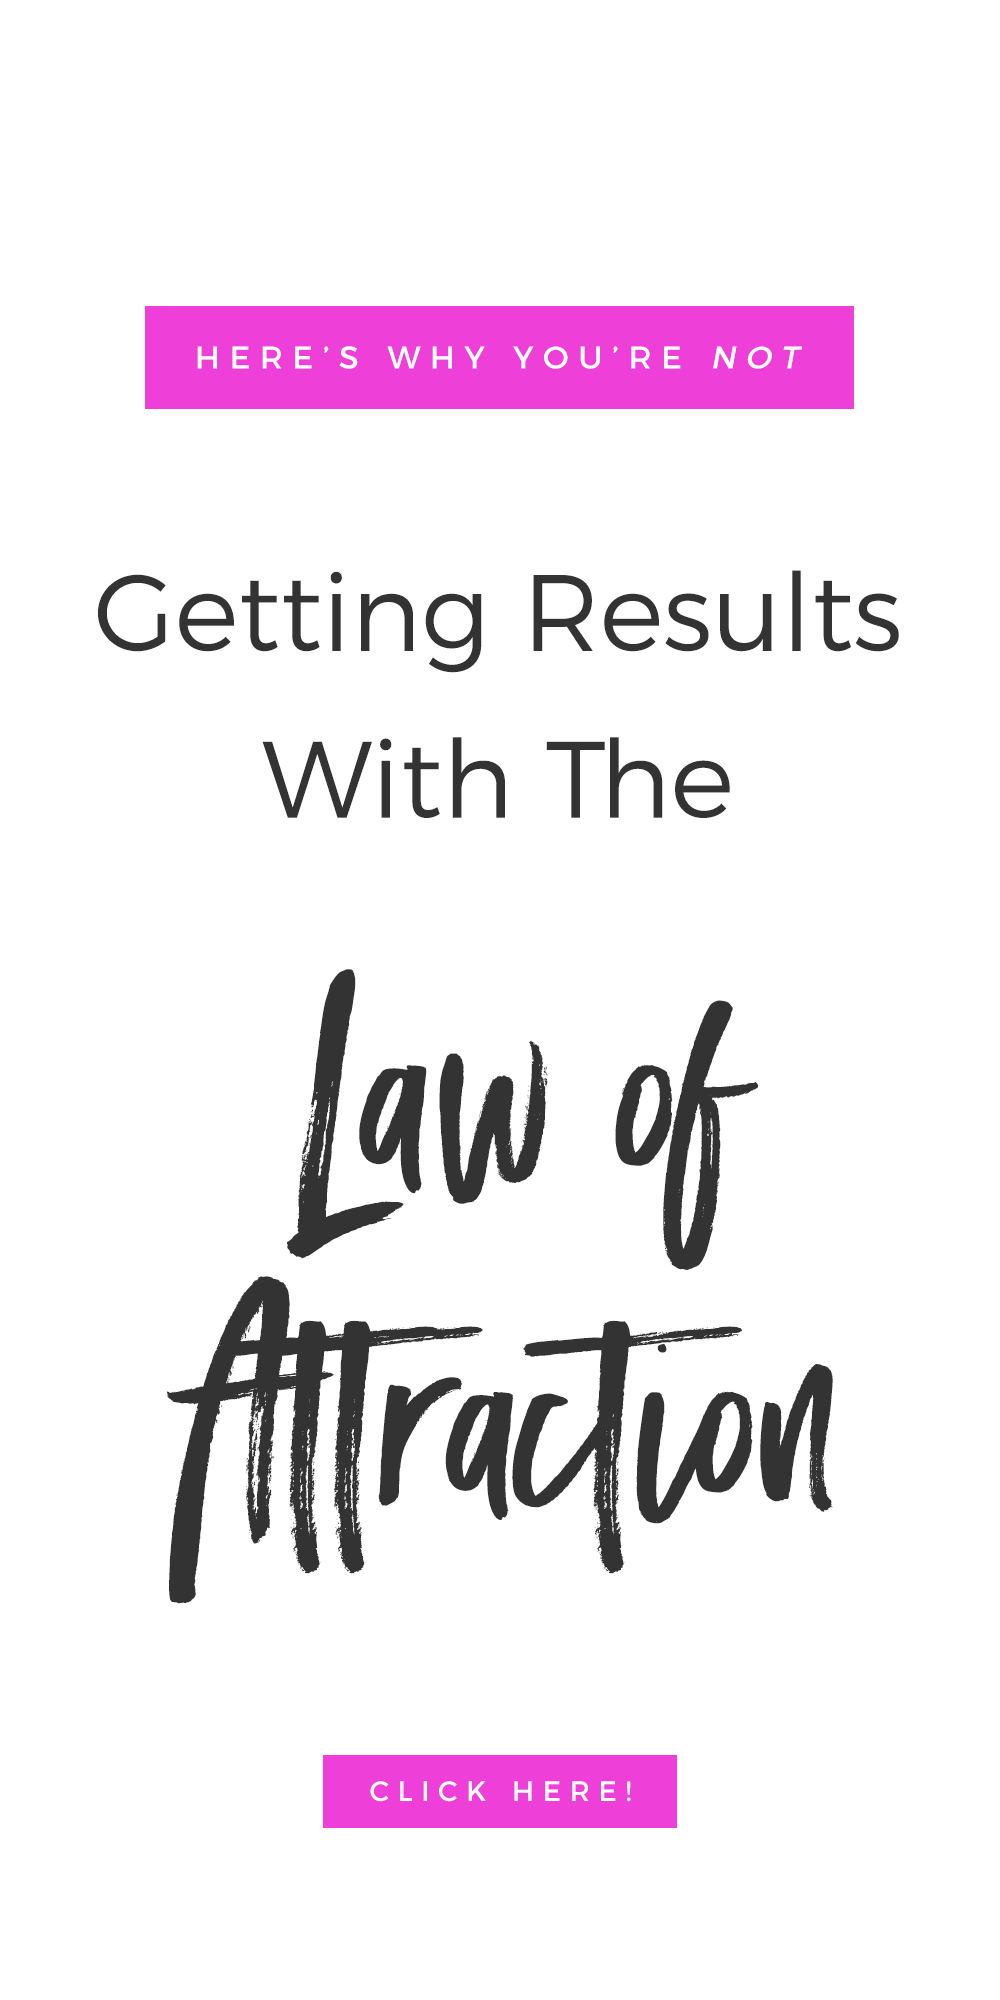 Here's Why You're Not Getting Results With The Law of Attraction